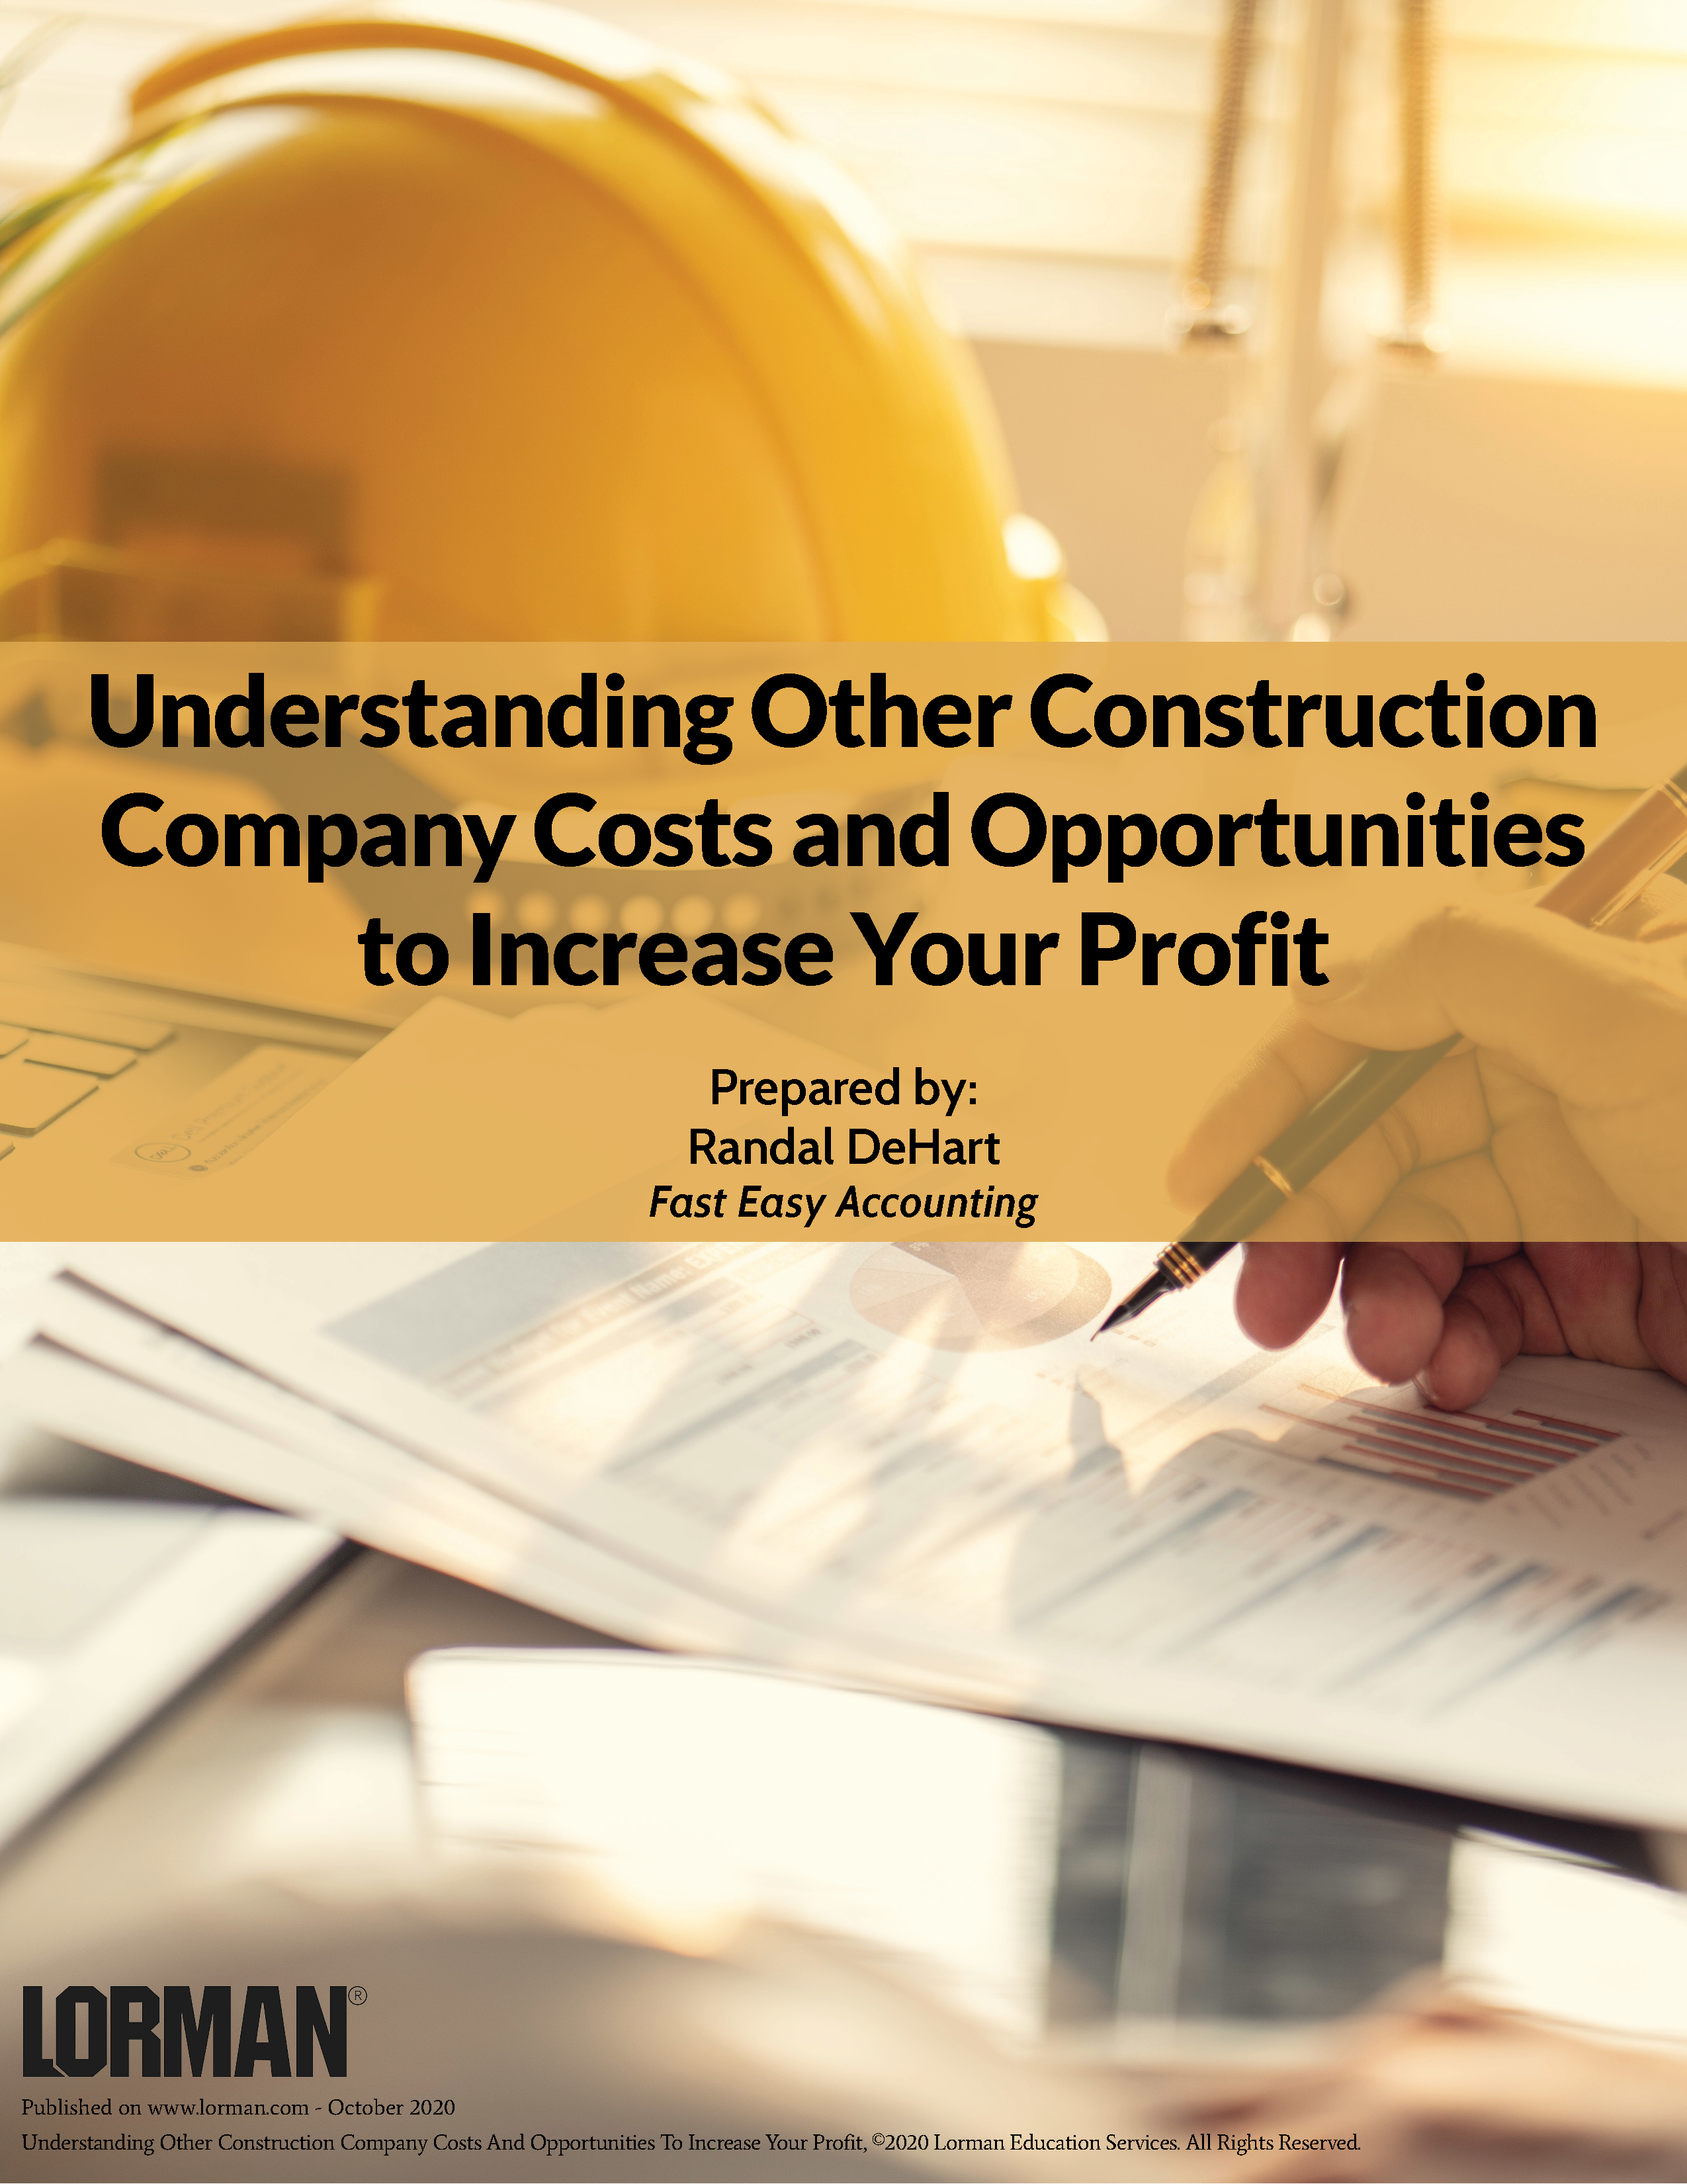 Understanding Other Construction Company Costs and Opportunities to Increase Your Profit